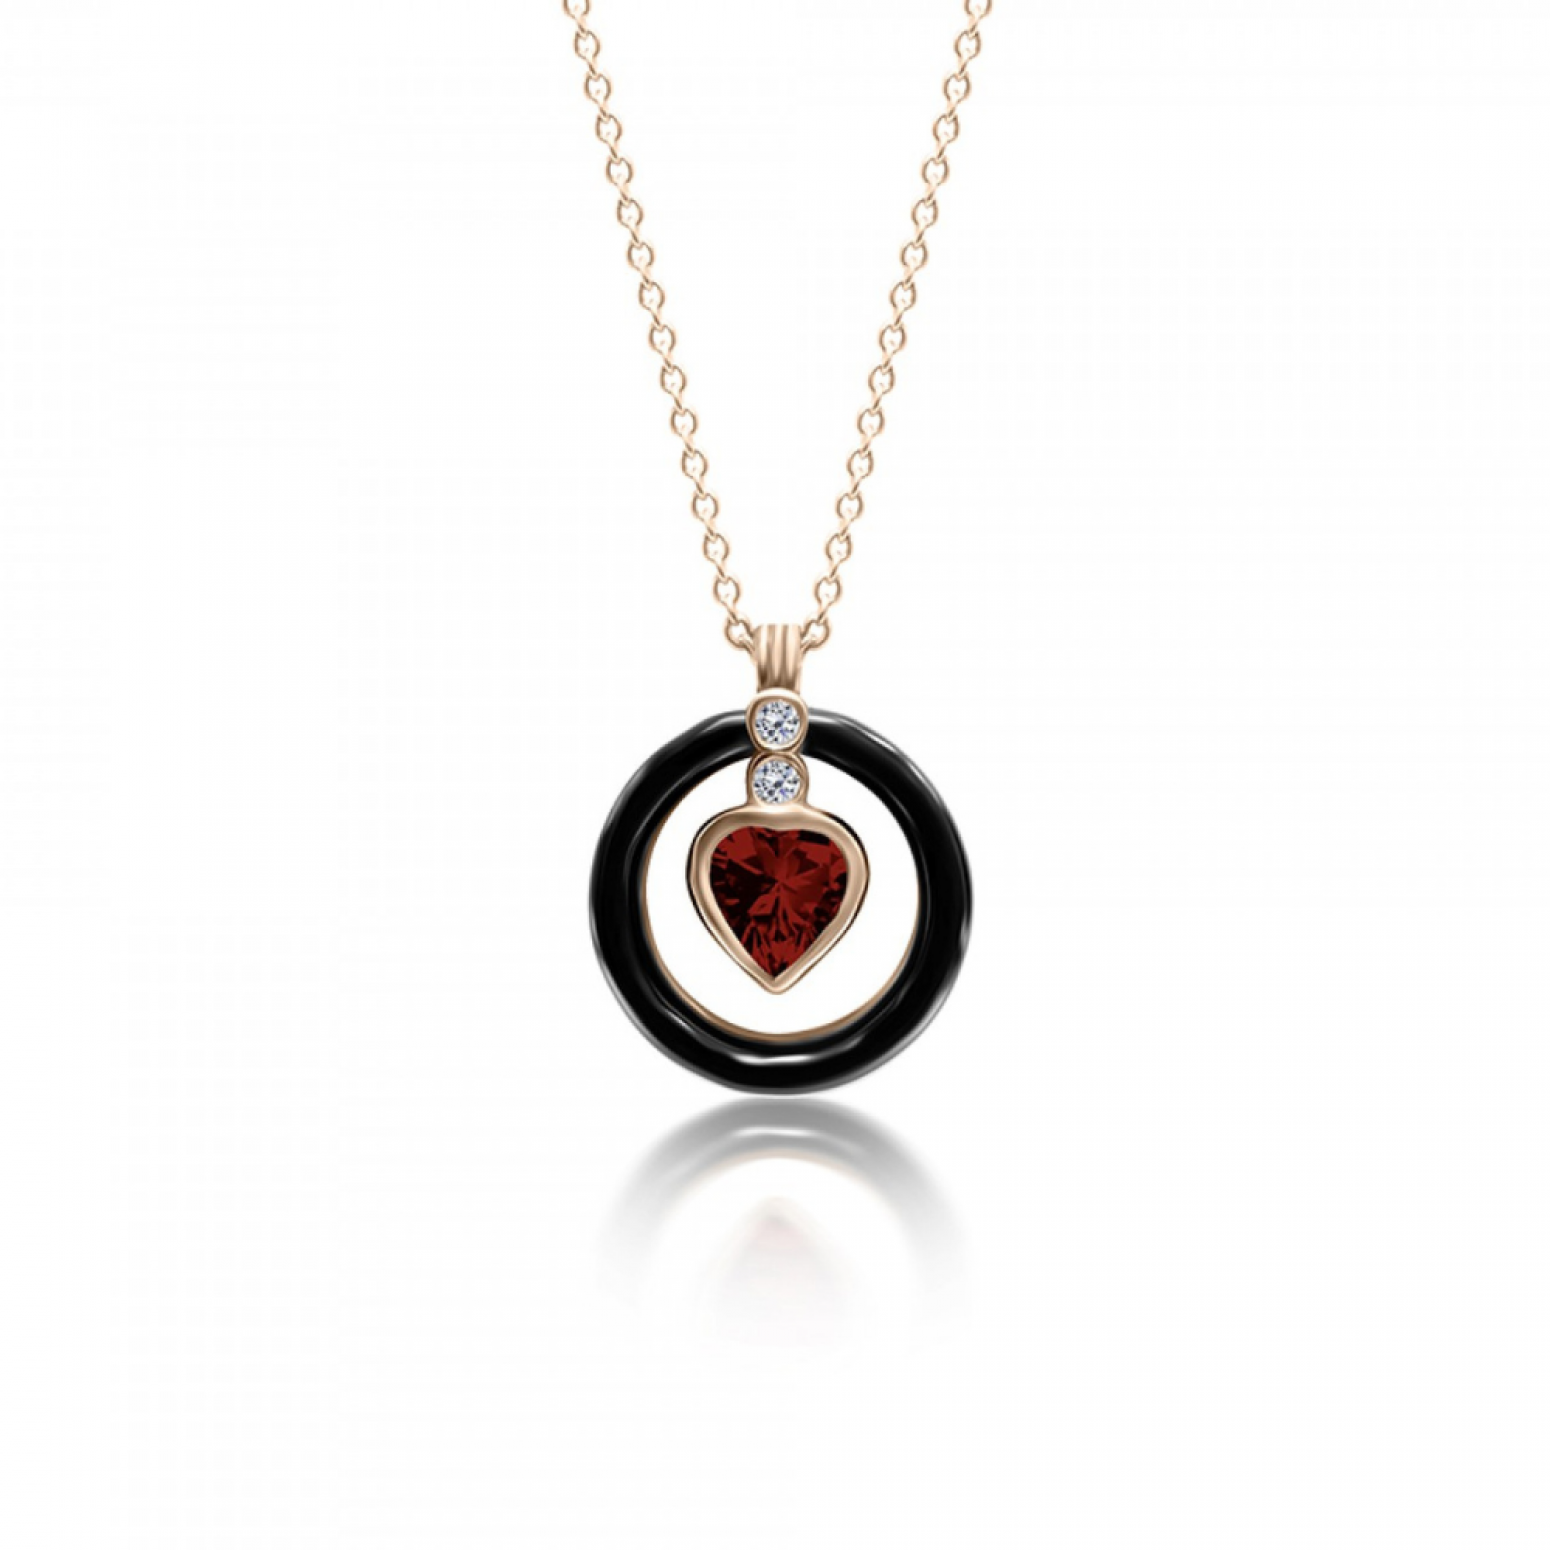 Heart necklace, Κ18 gold with ruby 0.36ct,diamonds 0.02ct VS1, G and enamel ko5461 NECKLACES Κοσμηματα - chrilia.gr